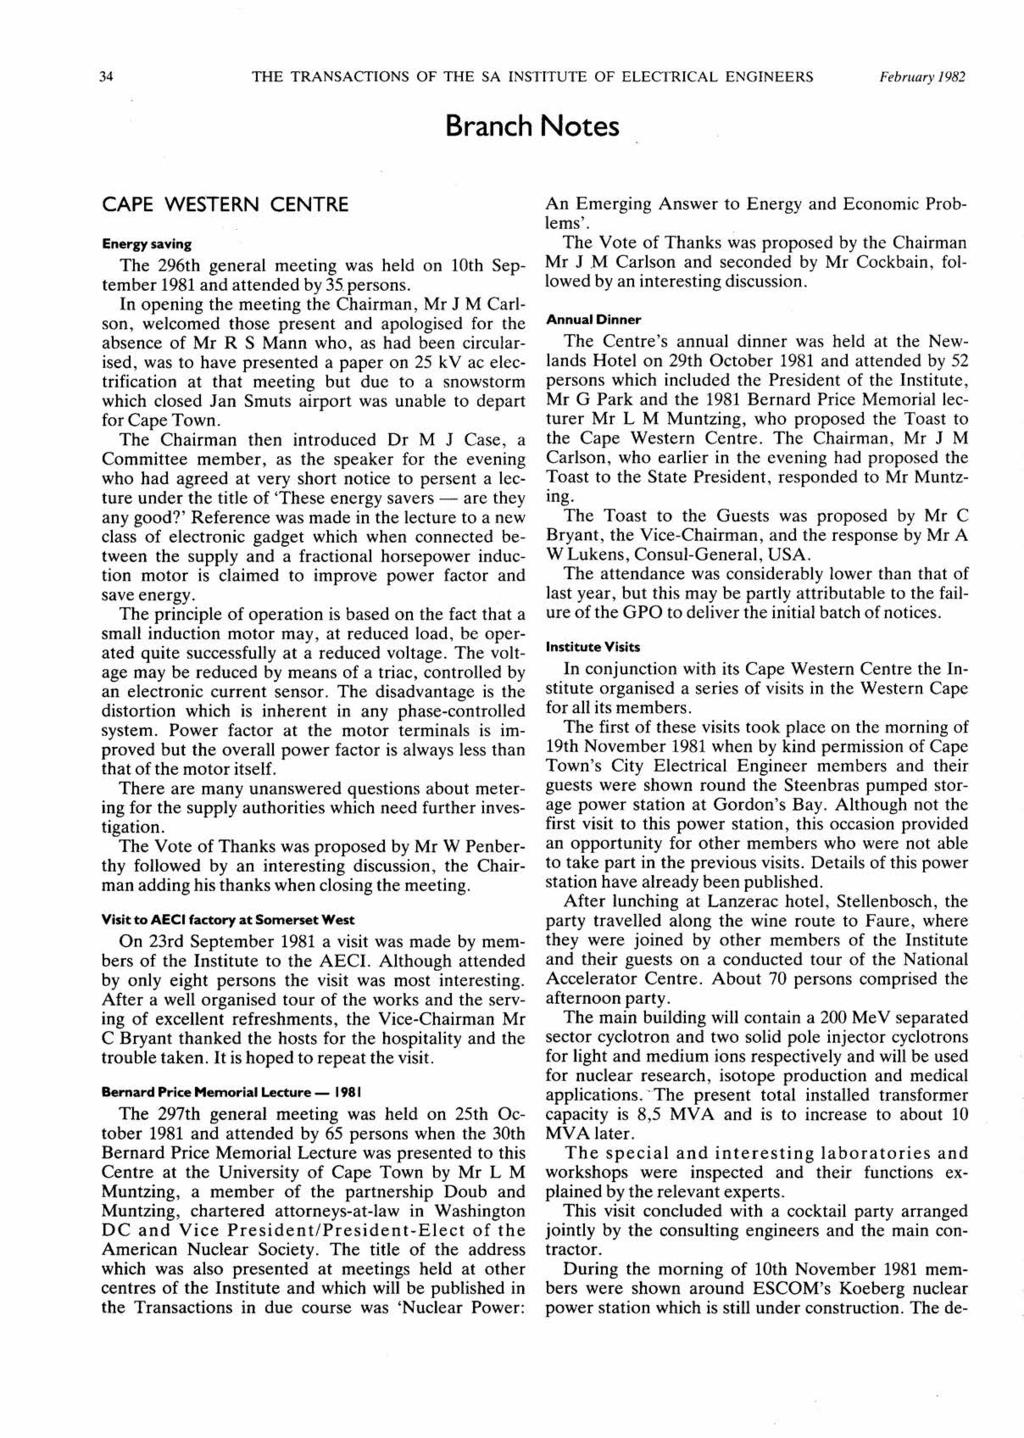 34 THE TRANSACTIONS OF THE SA INSTITUTE OF ELECTRICAL ENGINEERS February 1982 Branch Notes CAPE WESTERN CENTRE Energy saving The 296th general meeting was held on 10th Sep tember 1981 and attended by